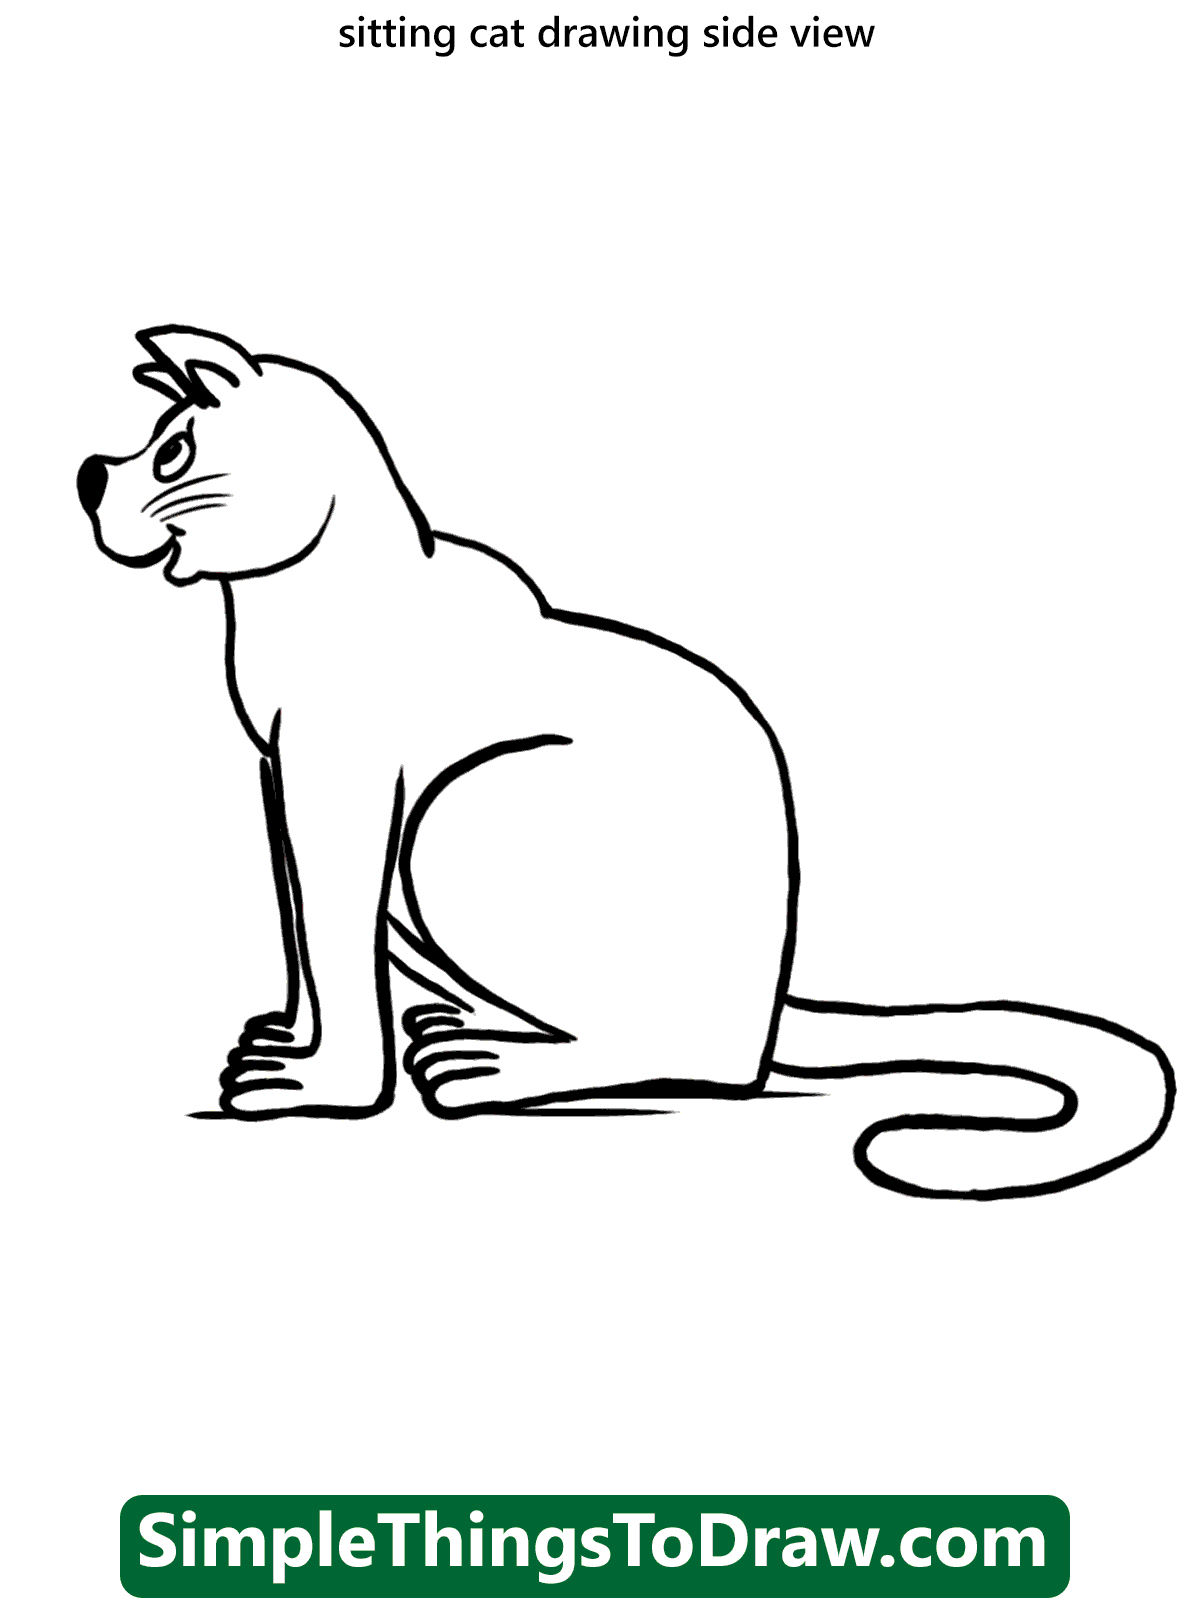 Cat Sitting Side View Drawing (6 ideas) - Simple Things To Draw